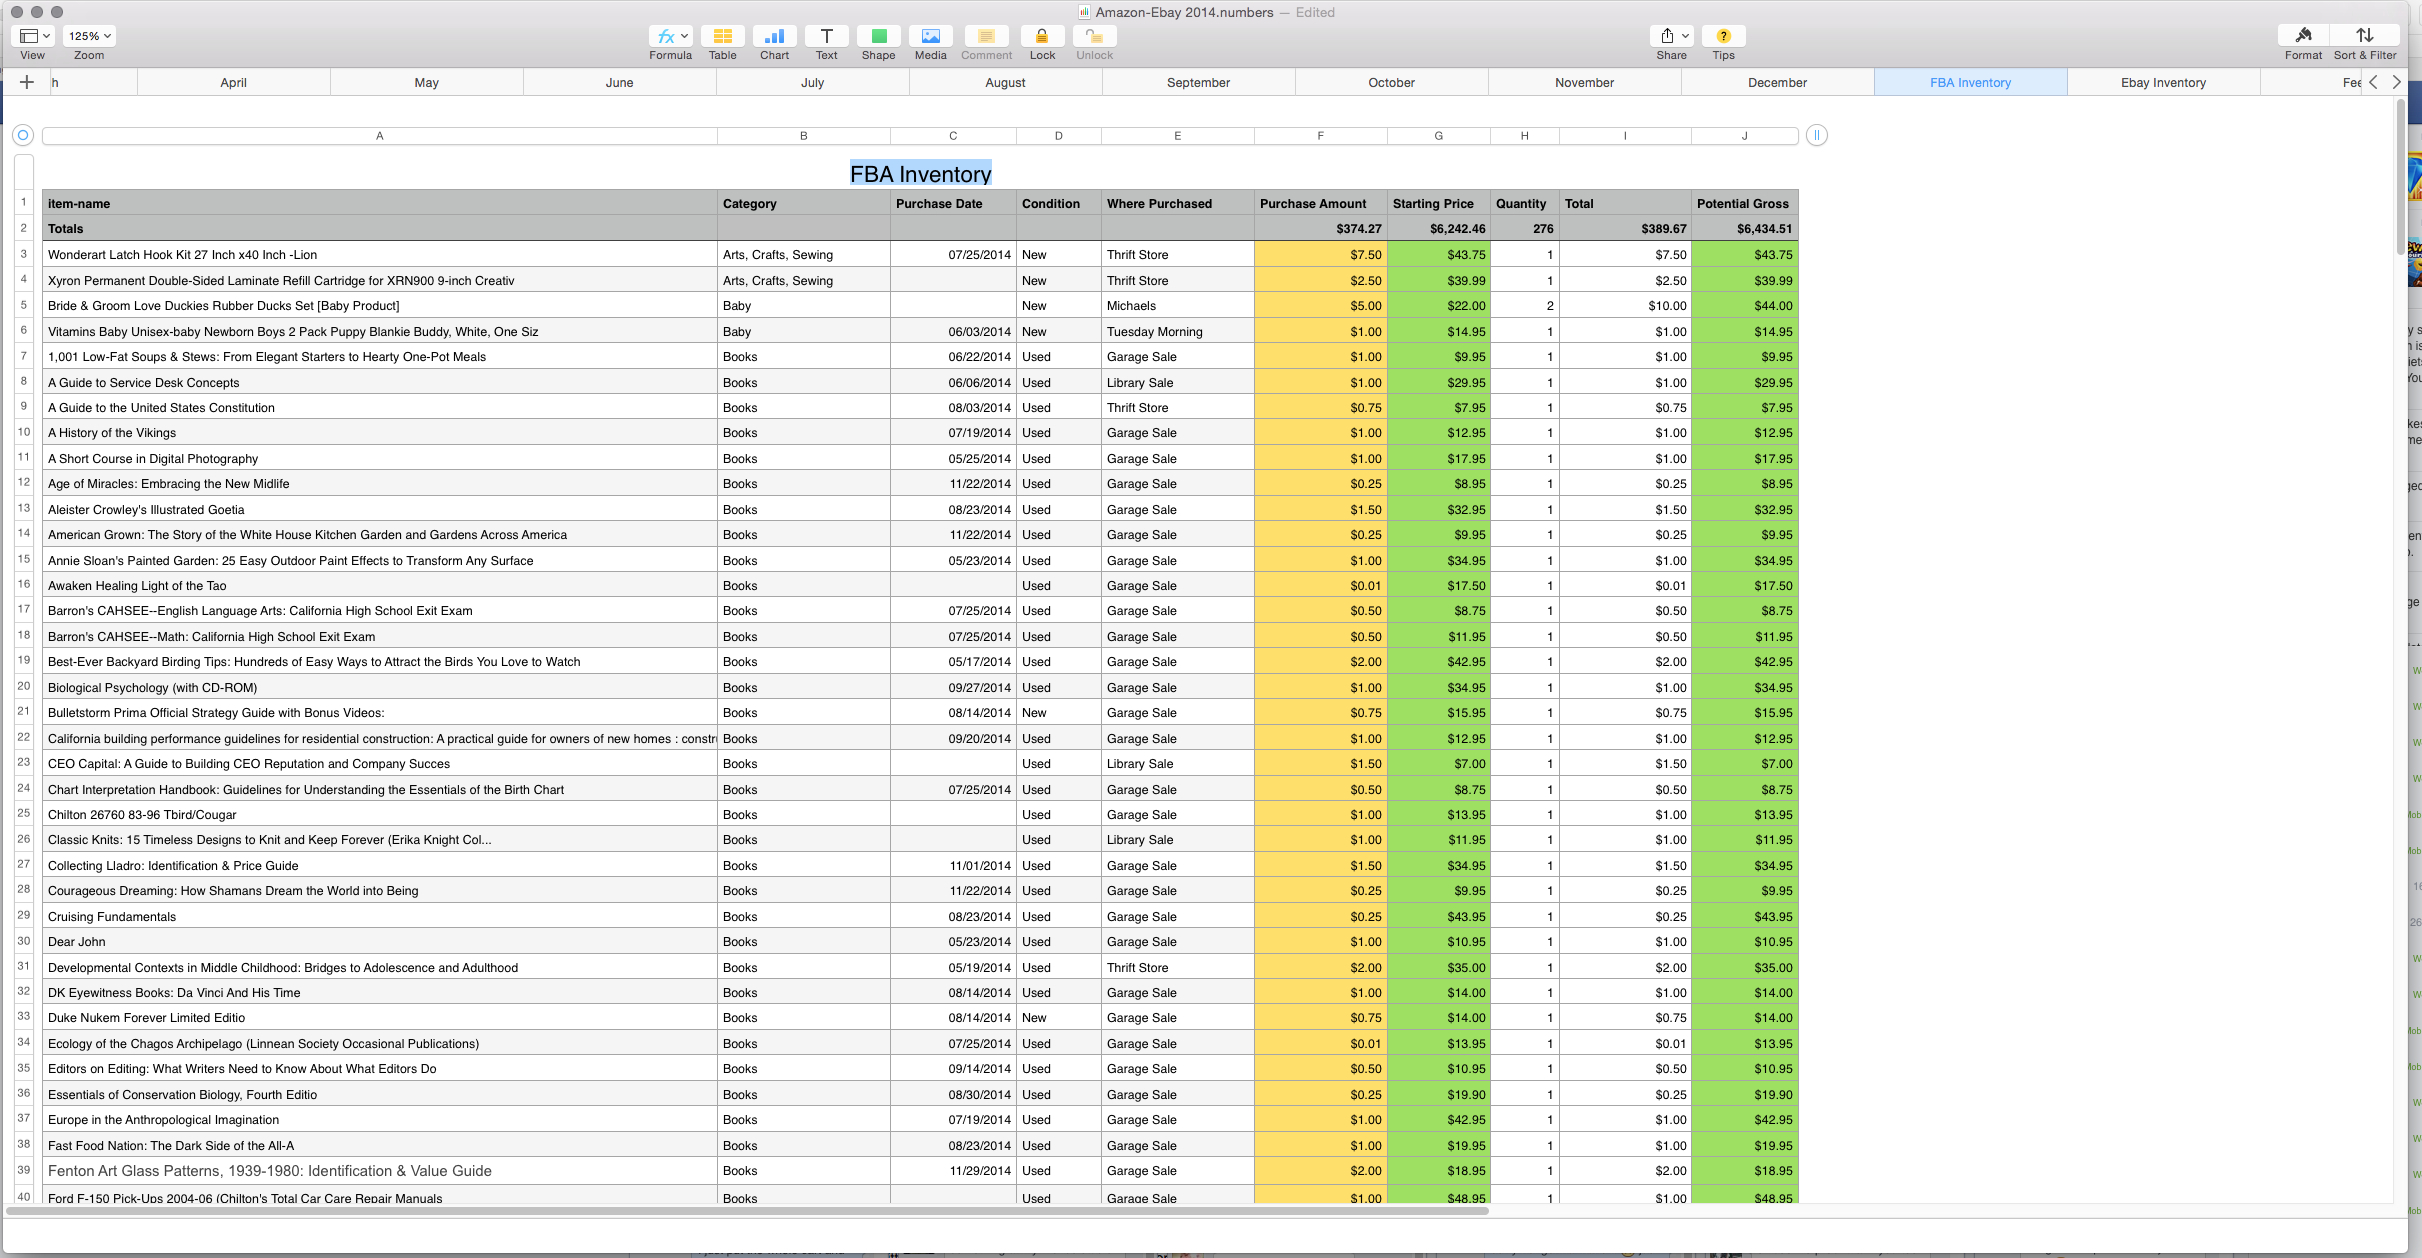 Spreadsheet For Sales Tracking On Inventory Spreadsheet Accounting Intended For Simple Sales Tracking Spreadsheet